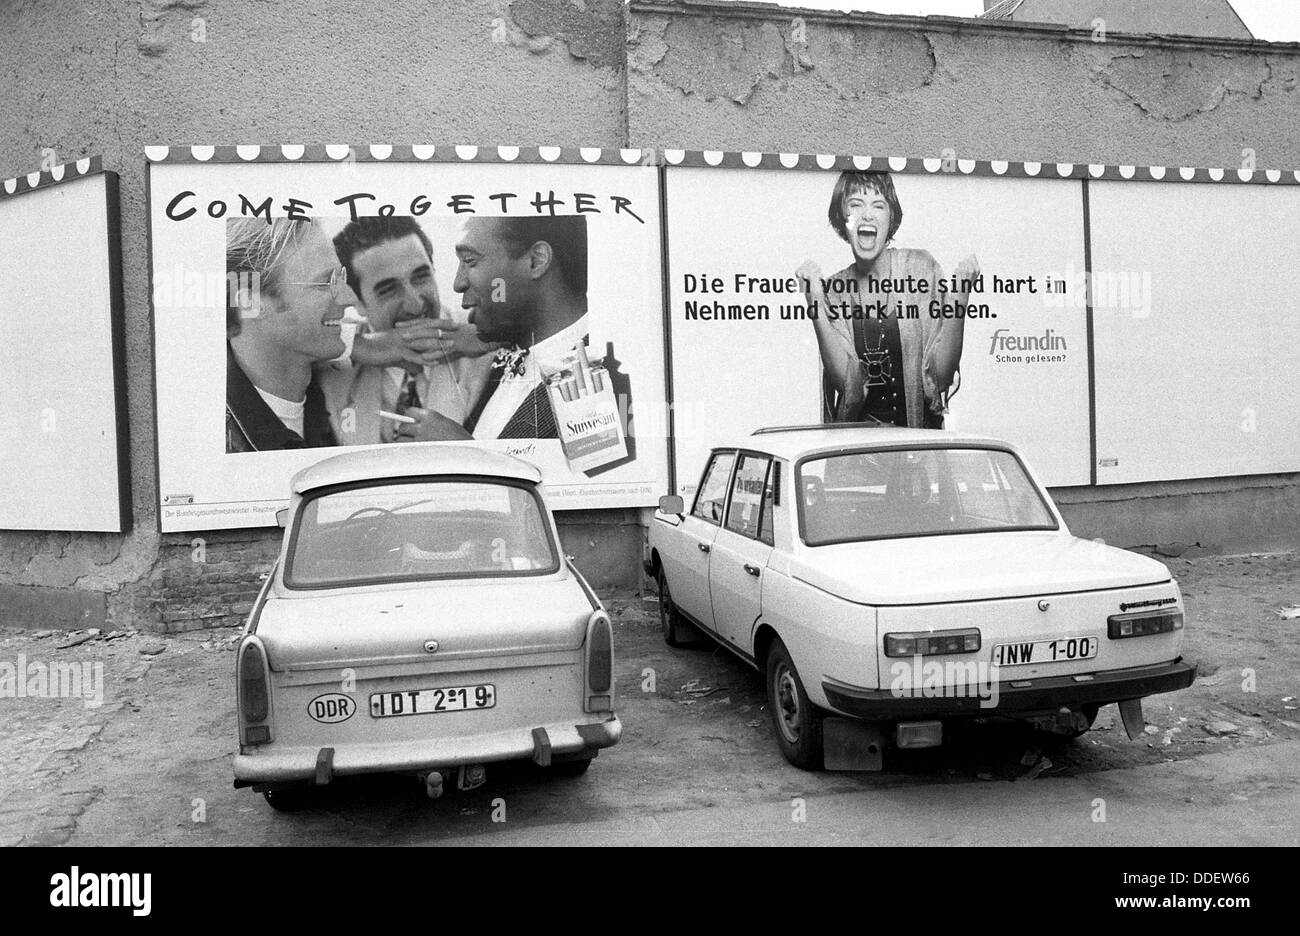 East German cars pictured under West German advertisement in Berlin, Germany. Photo: Reinhard Kaufhold Stock Photo